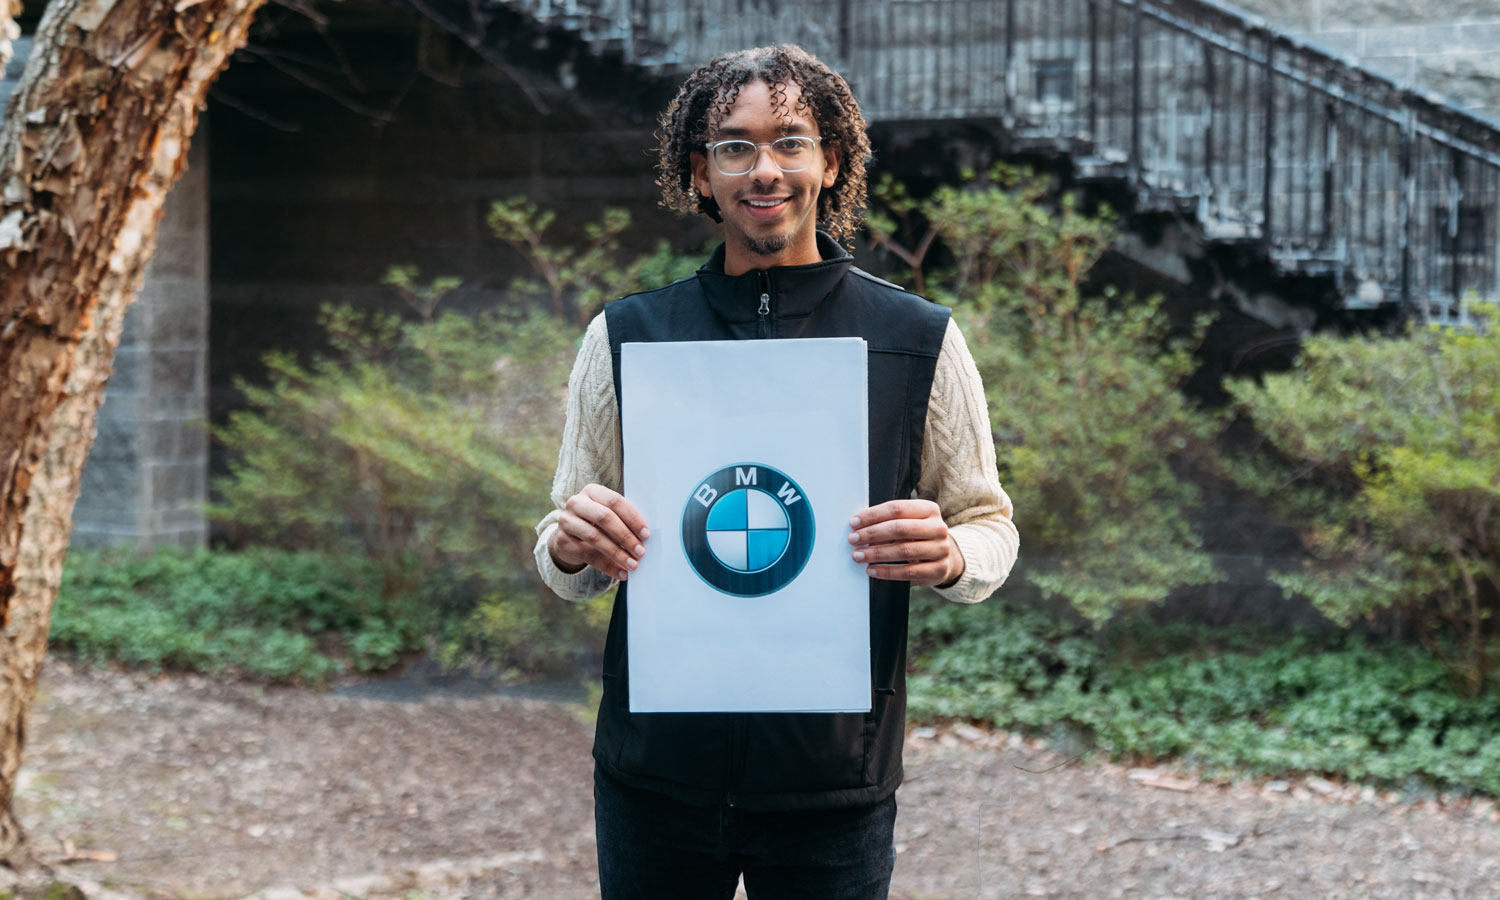 Mustafa Tewfig holding a piece of paper with the BMW logo on it